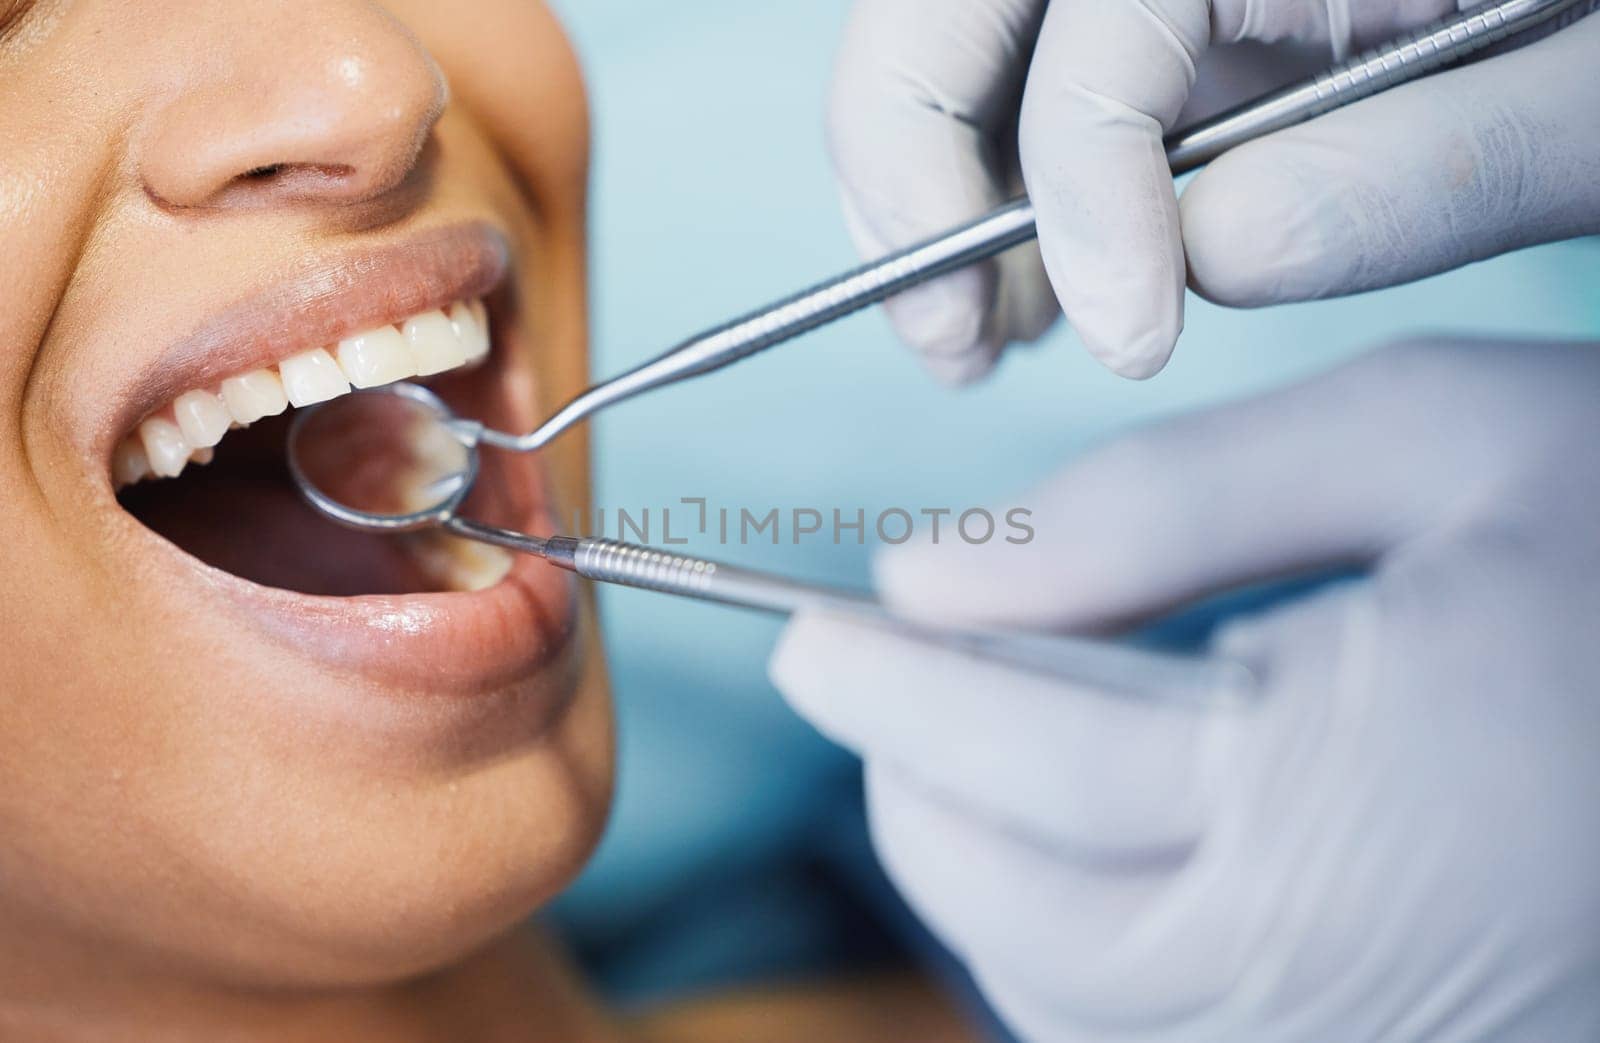 Dentist, healthcare and hands, patient mouth and medical tools, surgery and dental health. Tooth decay, orthodontics procedure and people in clinic for oral care, metal instrument and gingivitis.